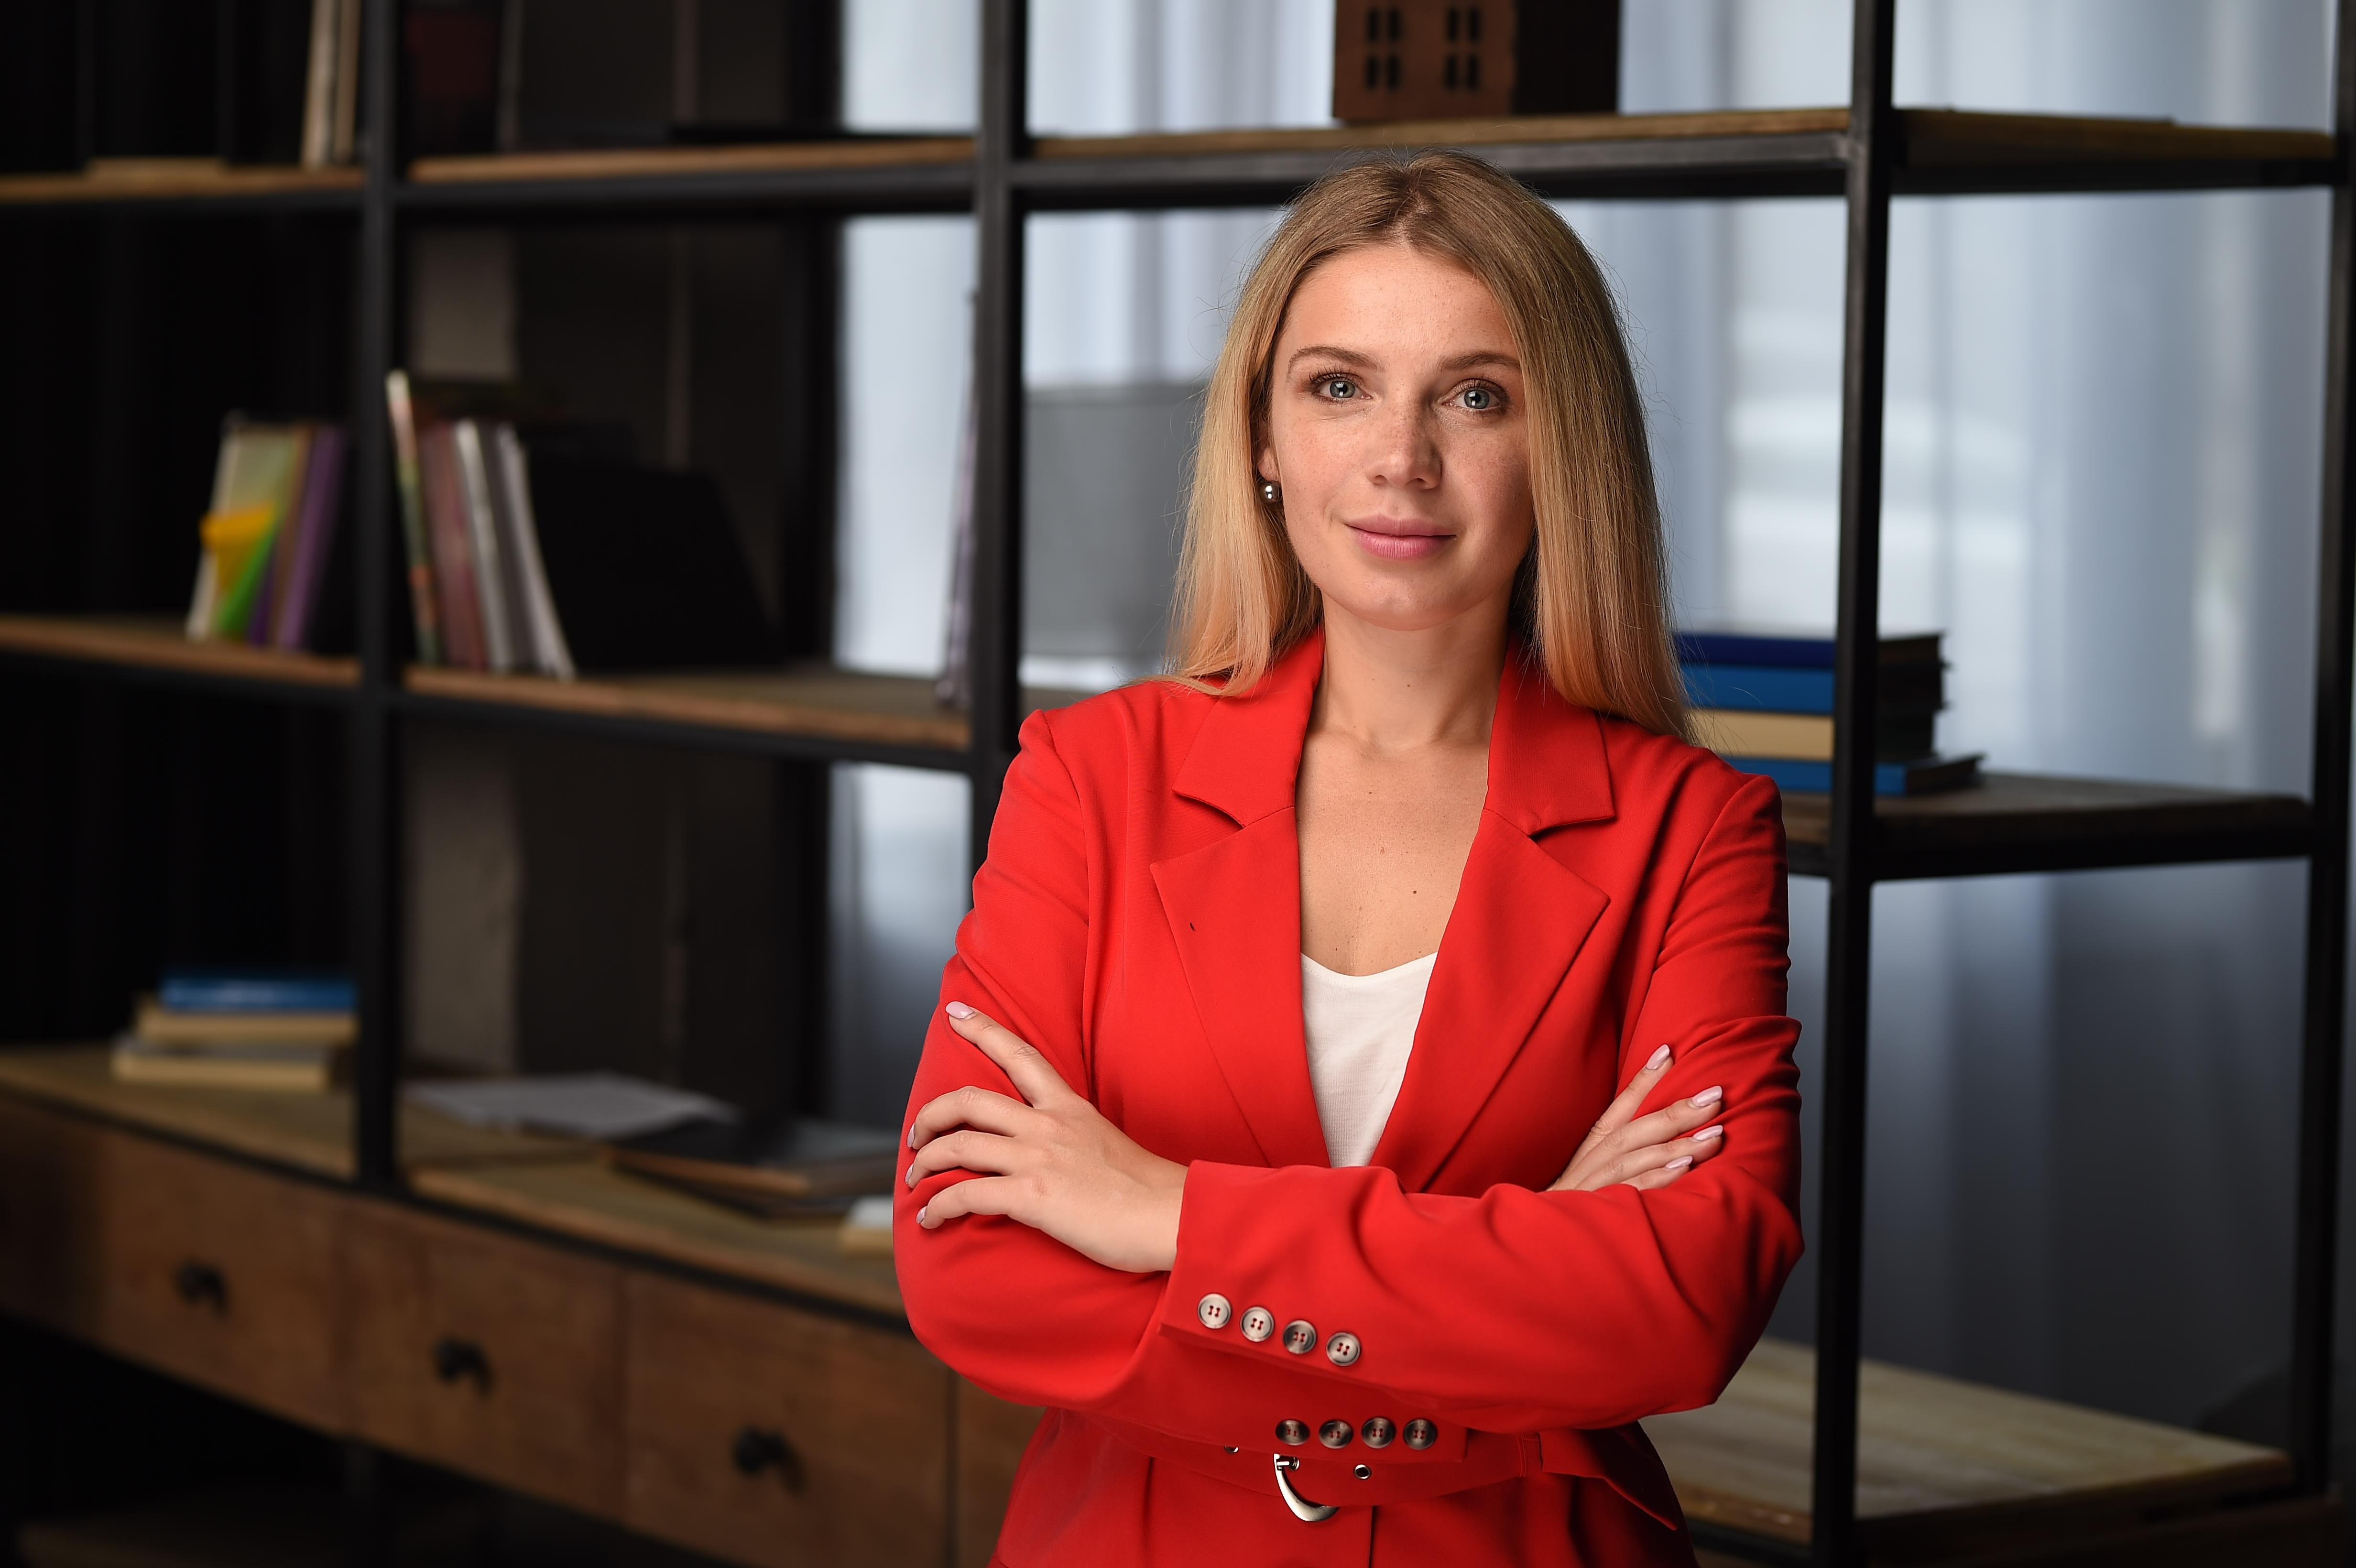 Nina Levchuk is the co-founder of Impact Force, a pioneering Ukrainian women-led non-profit organization that focuses on social behavioural change and economic opportunities. Photo: Courtesy of Nina Levchuk.